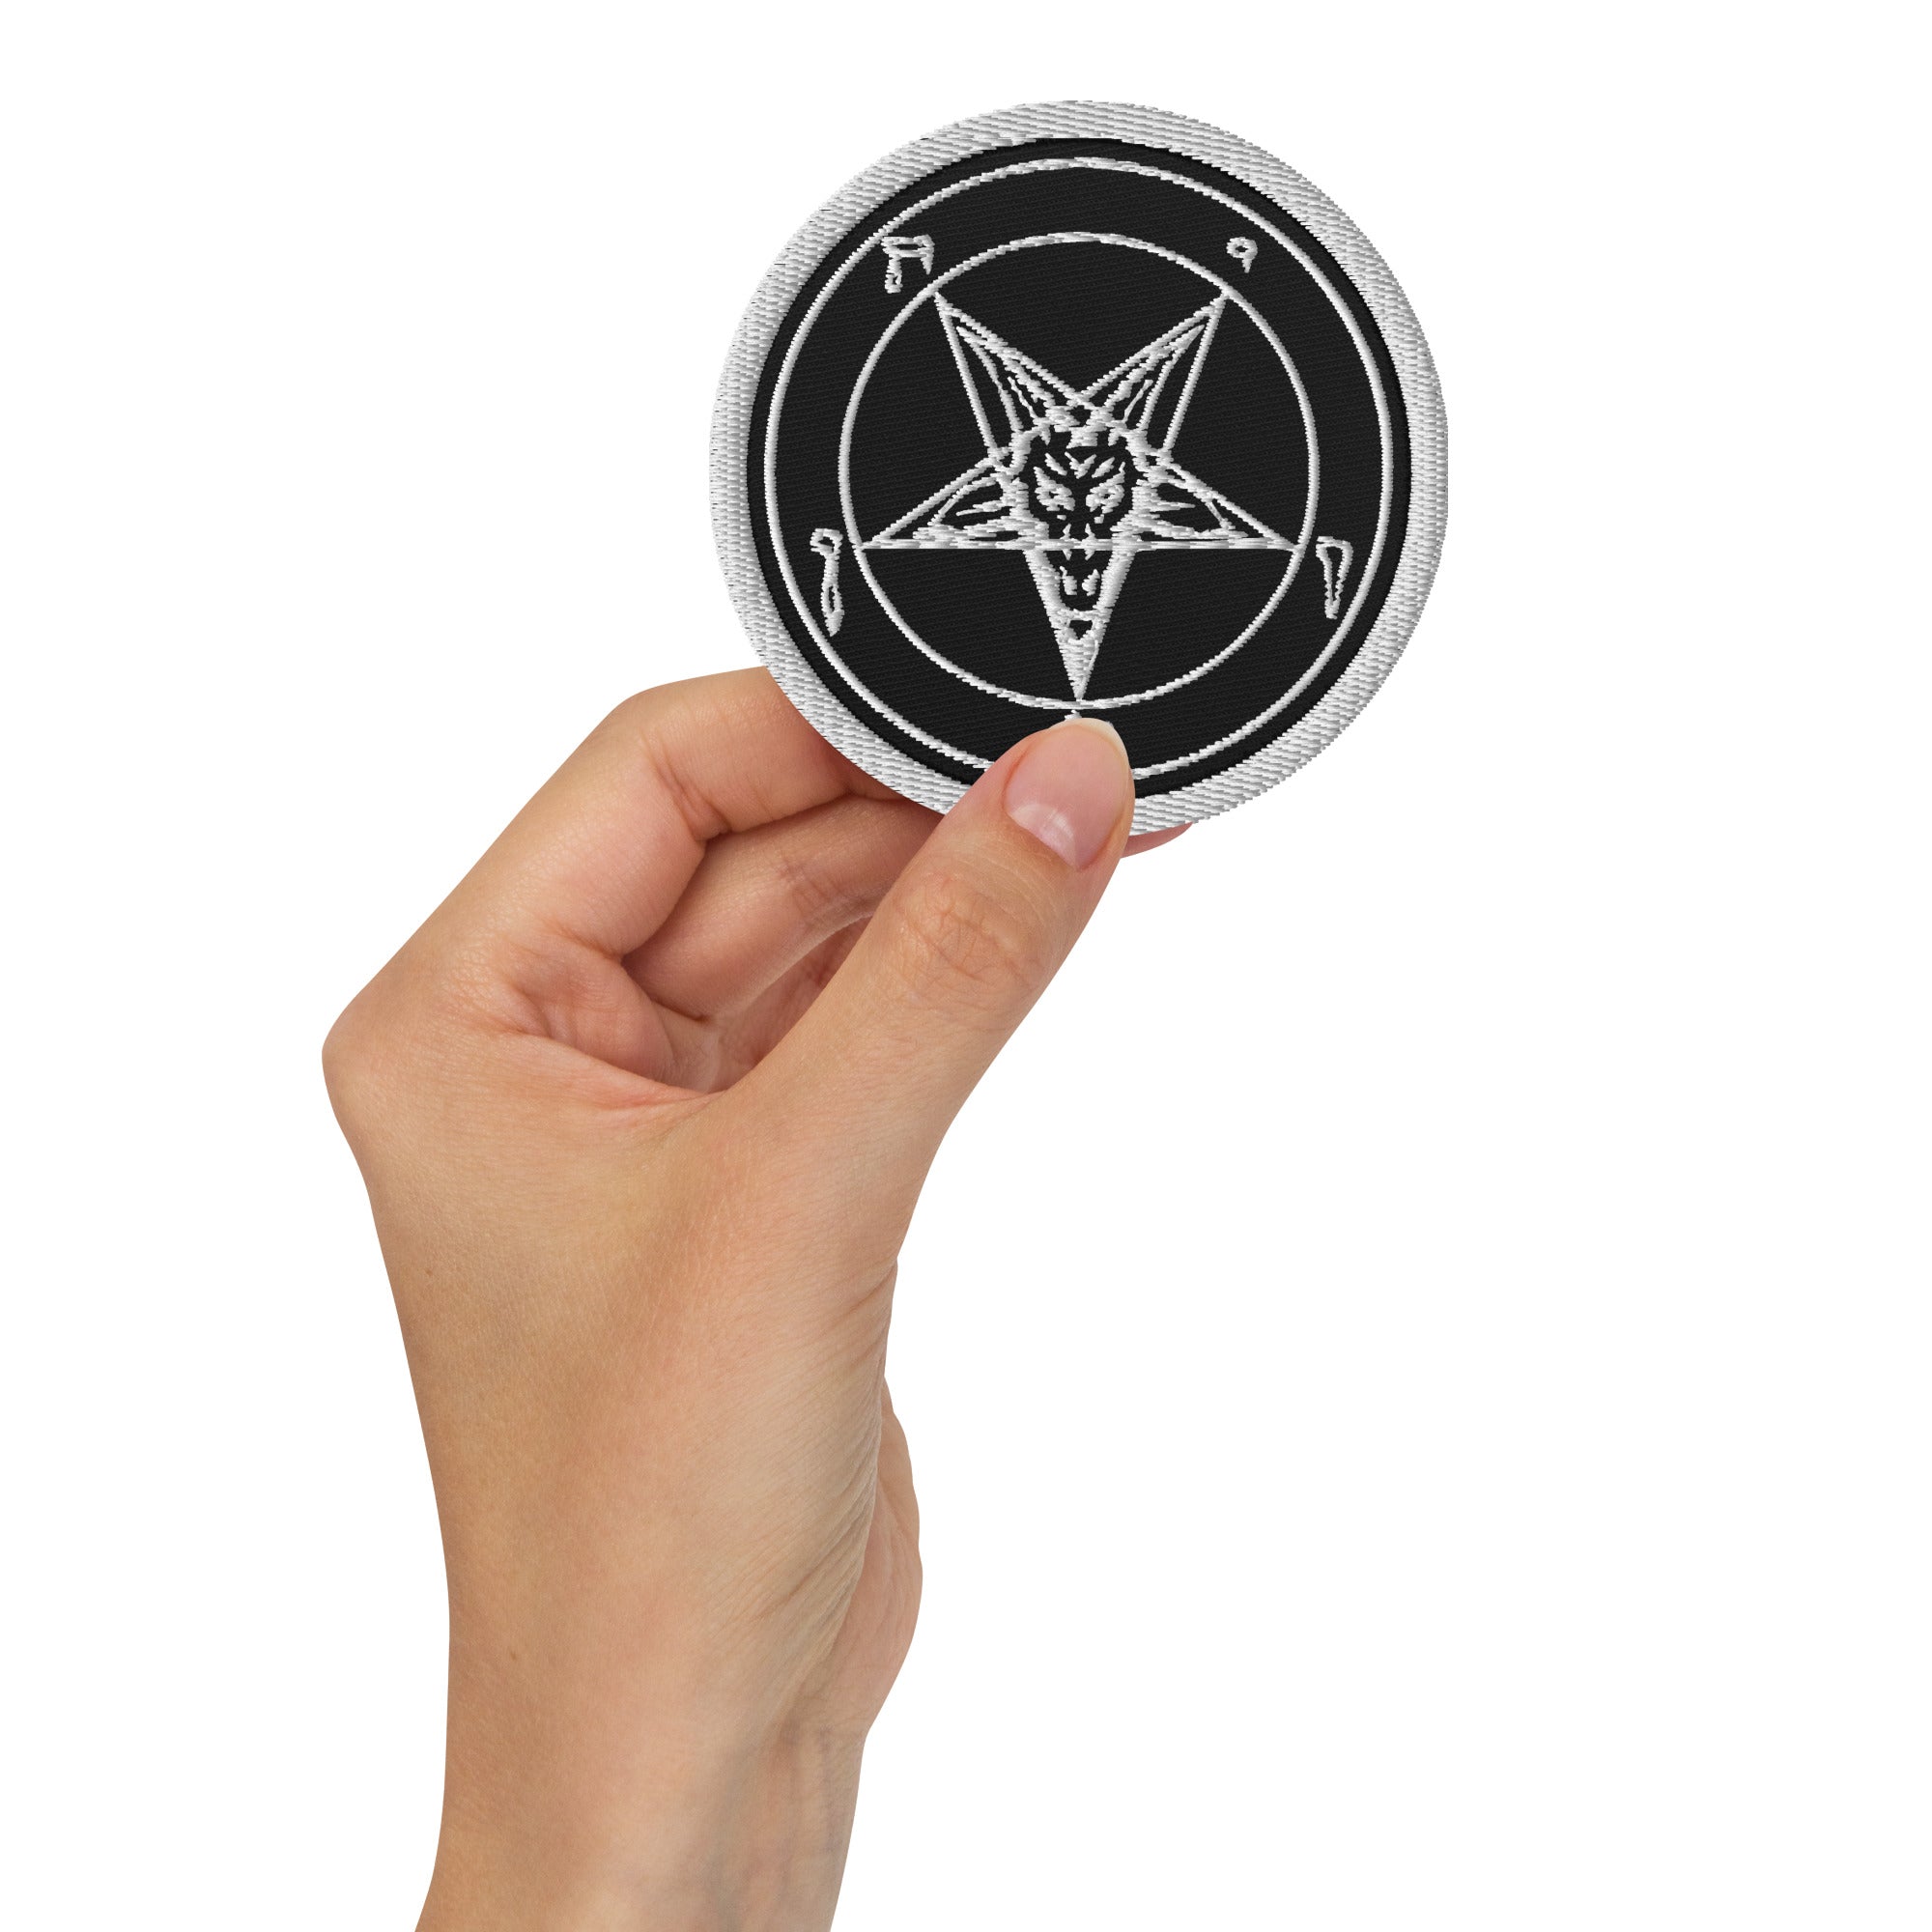 White Sigil of Baphomet Occult Symbol Embroidered Patch - Edge of Life Designs